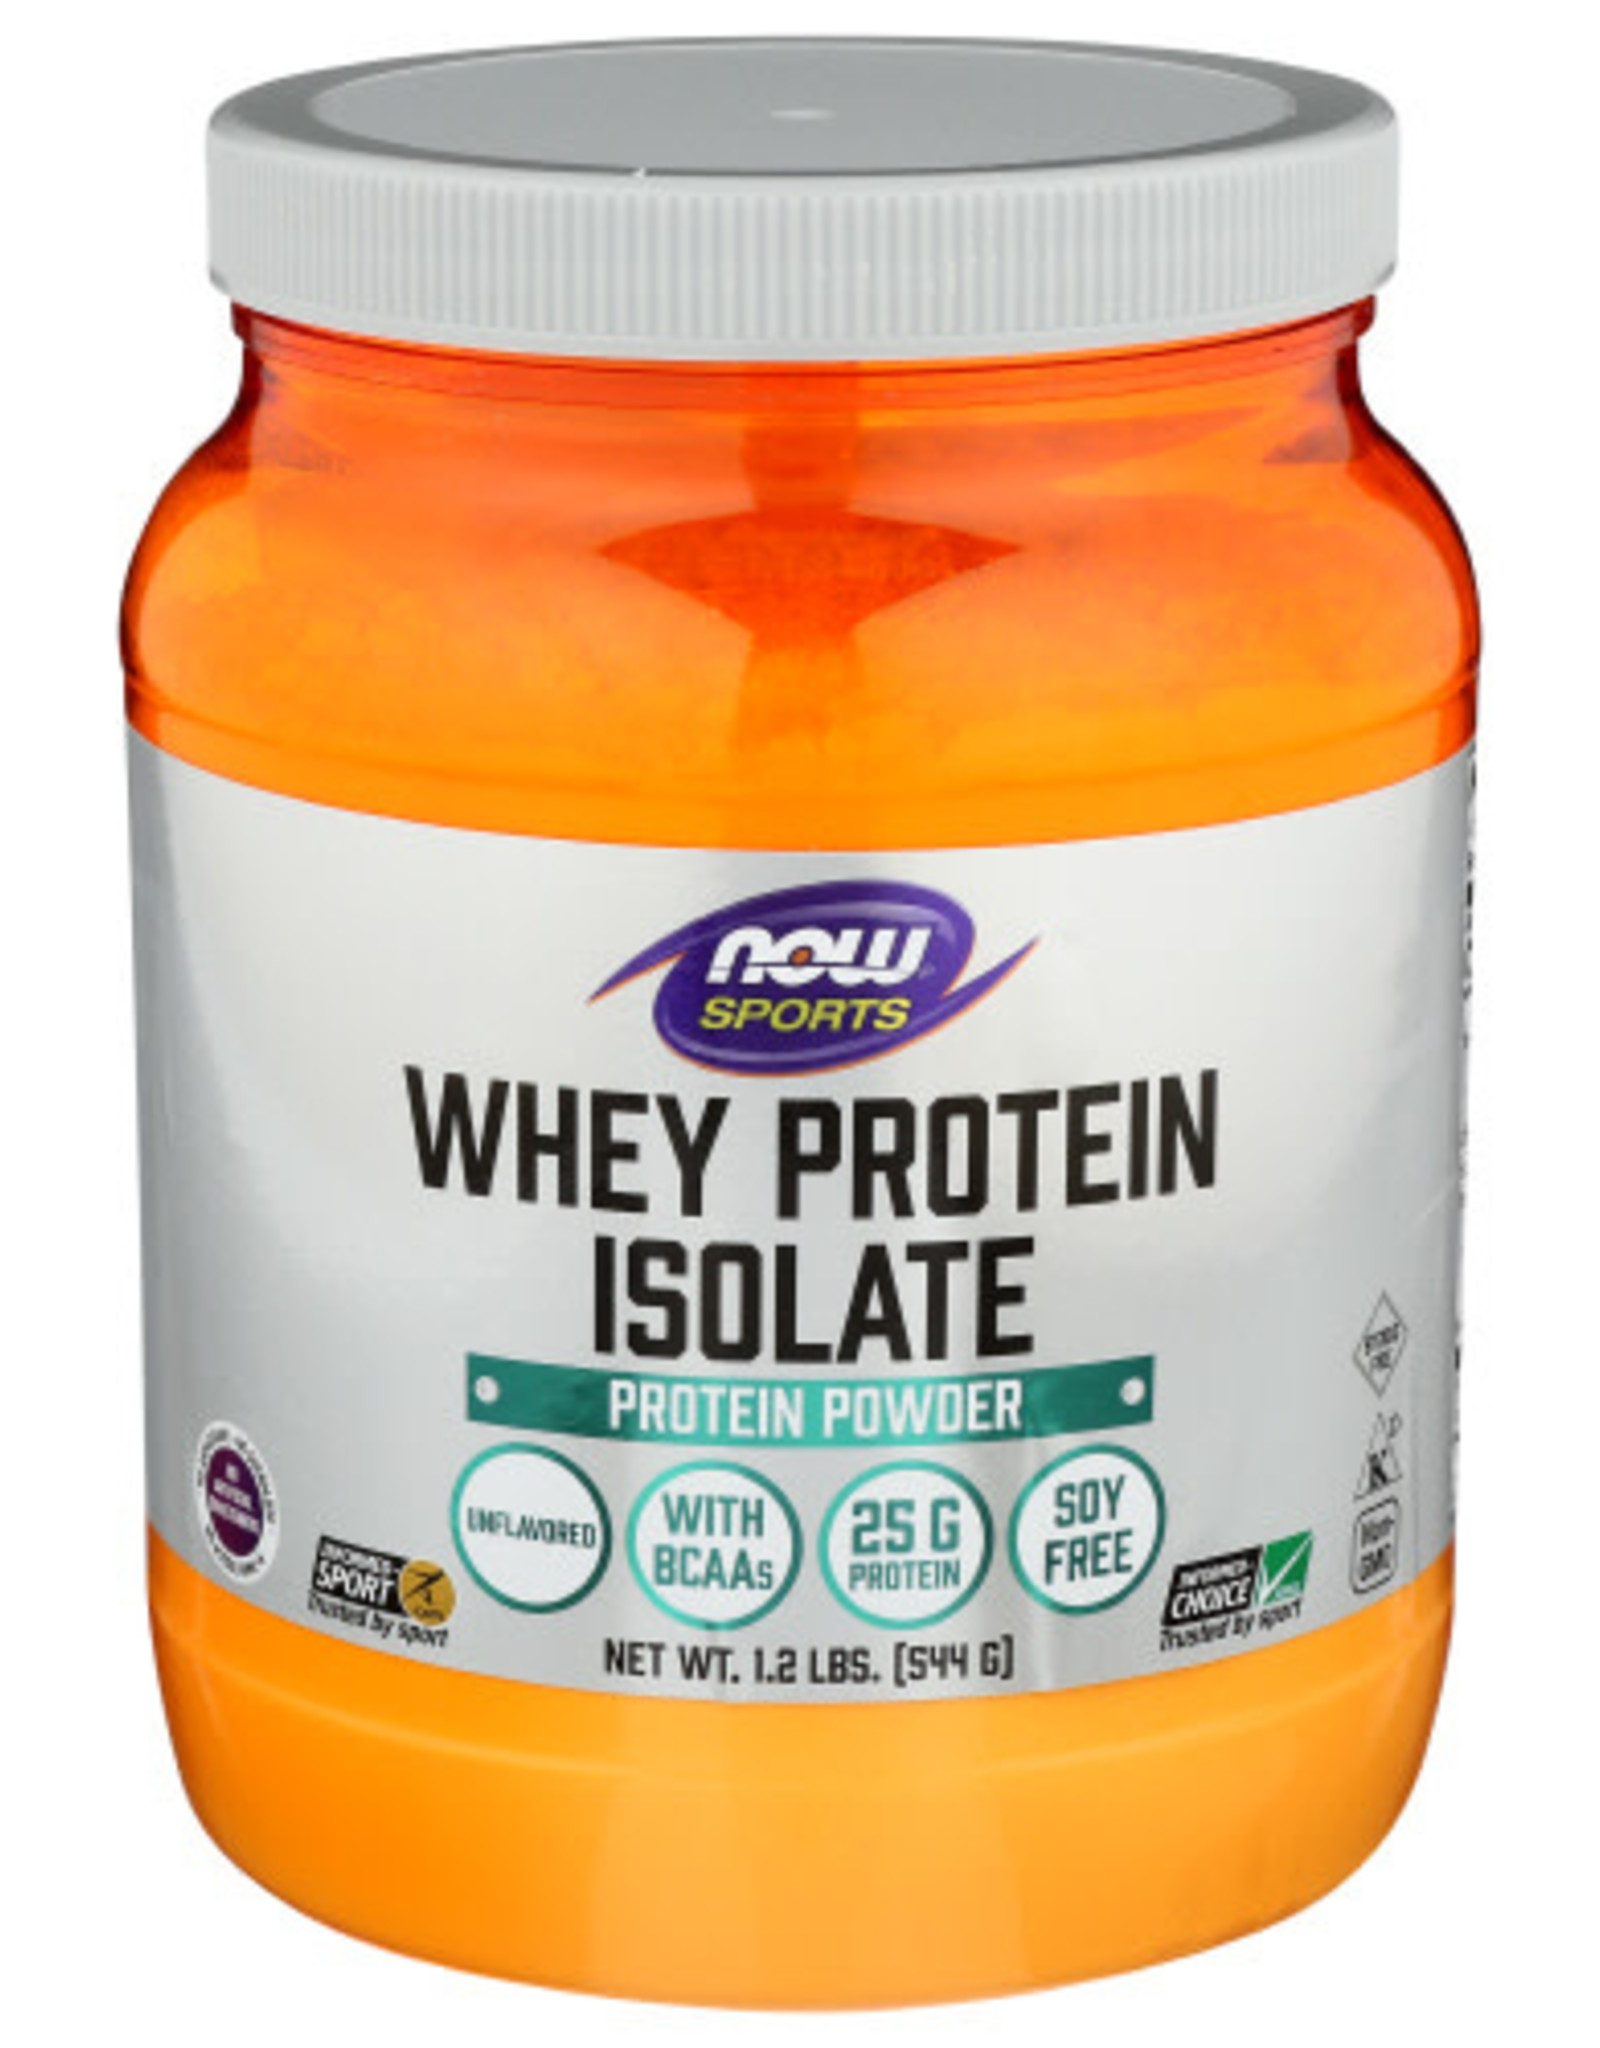 NOW FOODS Now Sports Whey Protein Isolate Protein Powder 1.2lbs